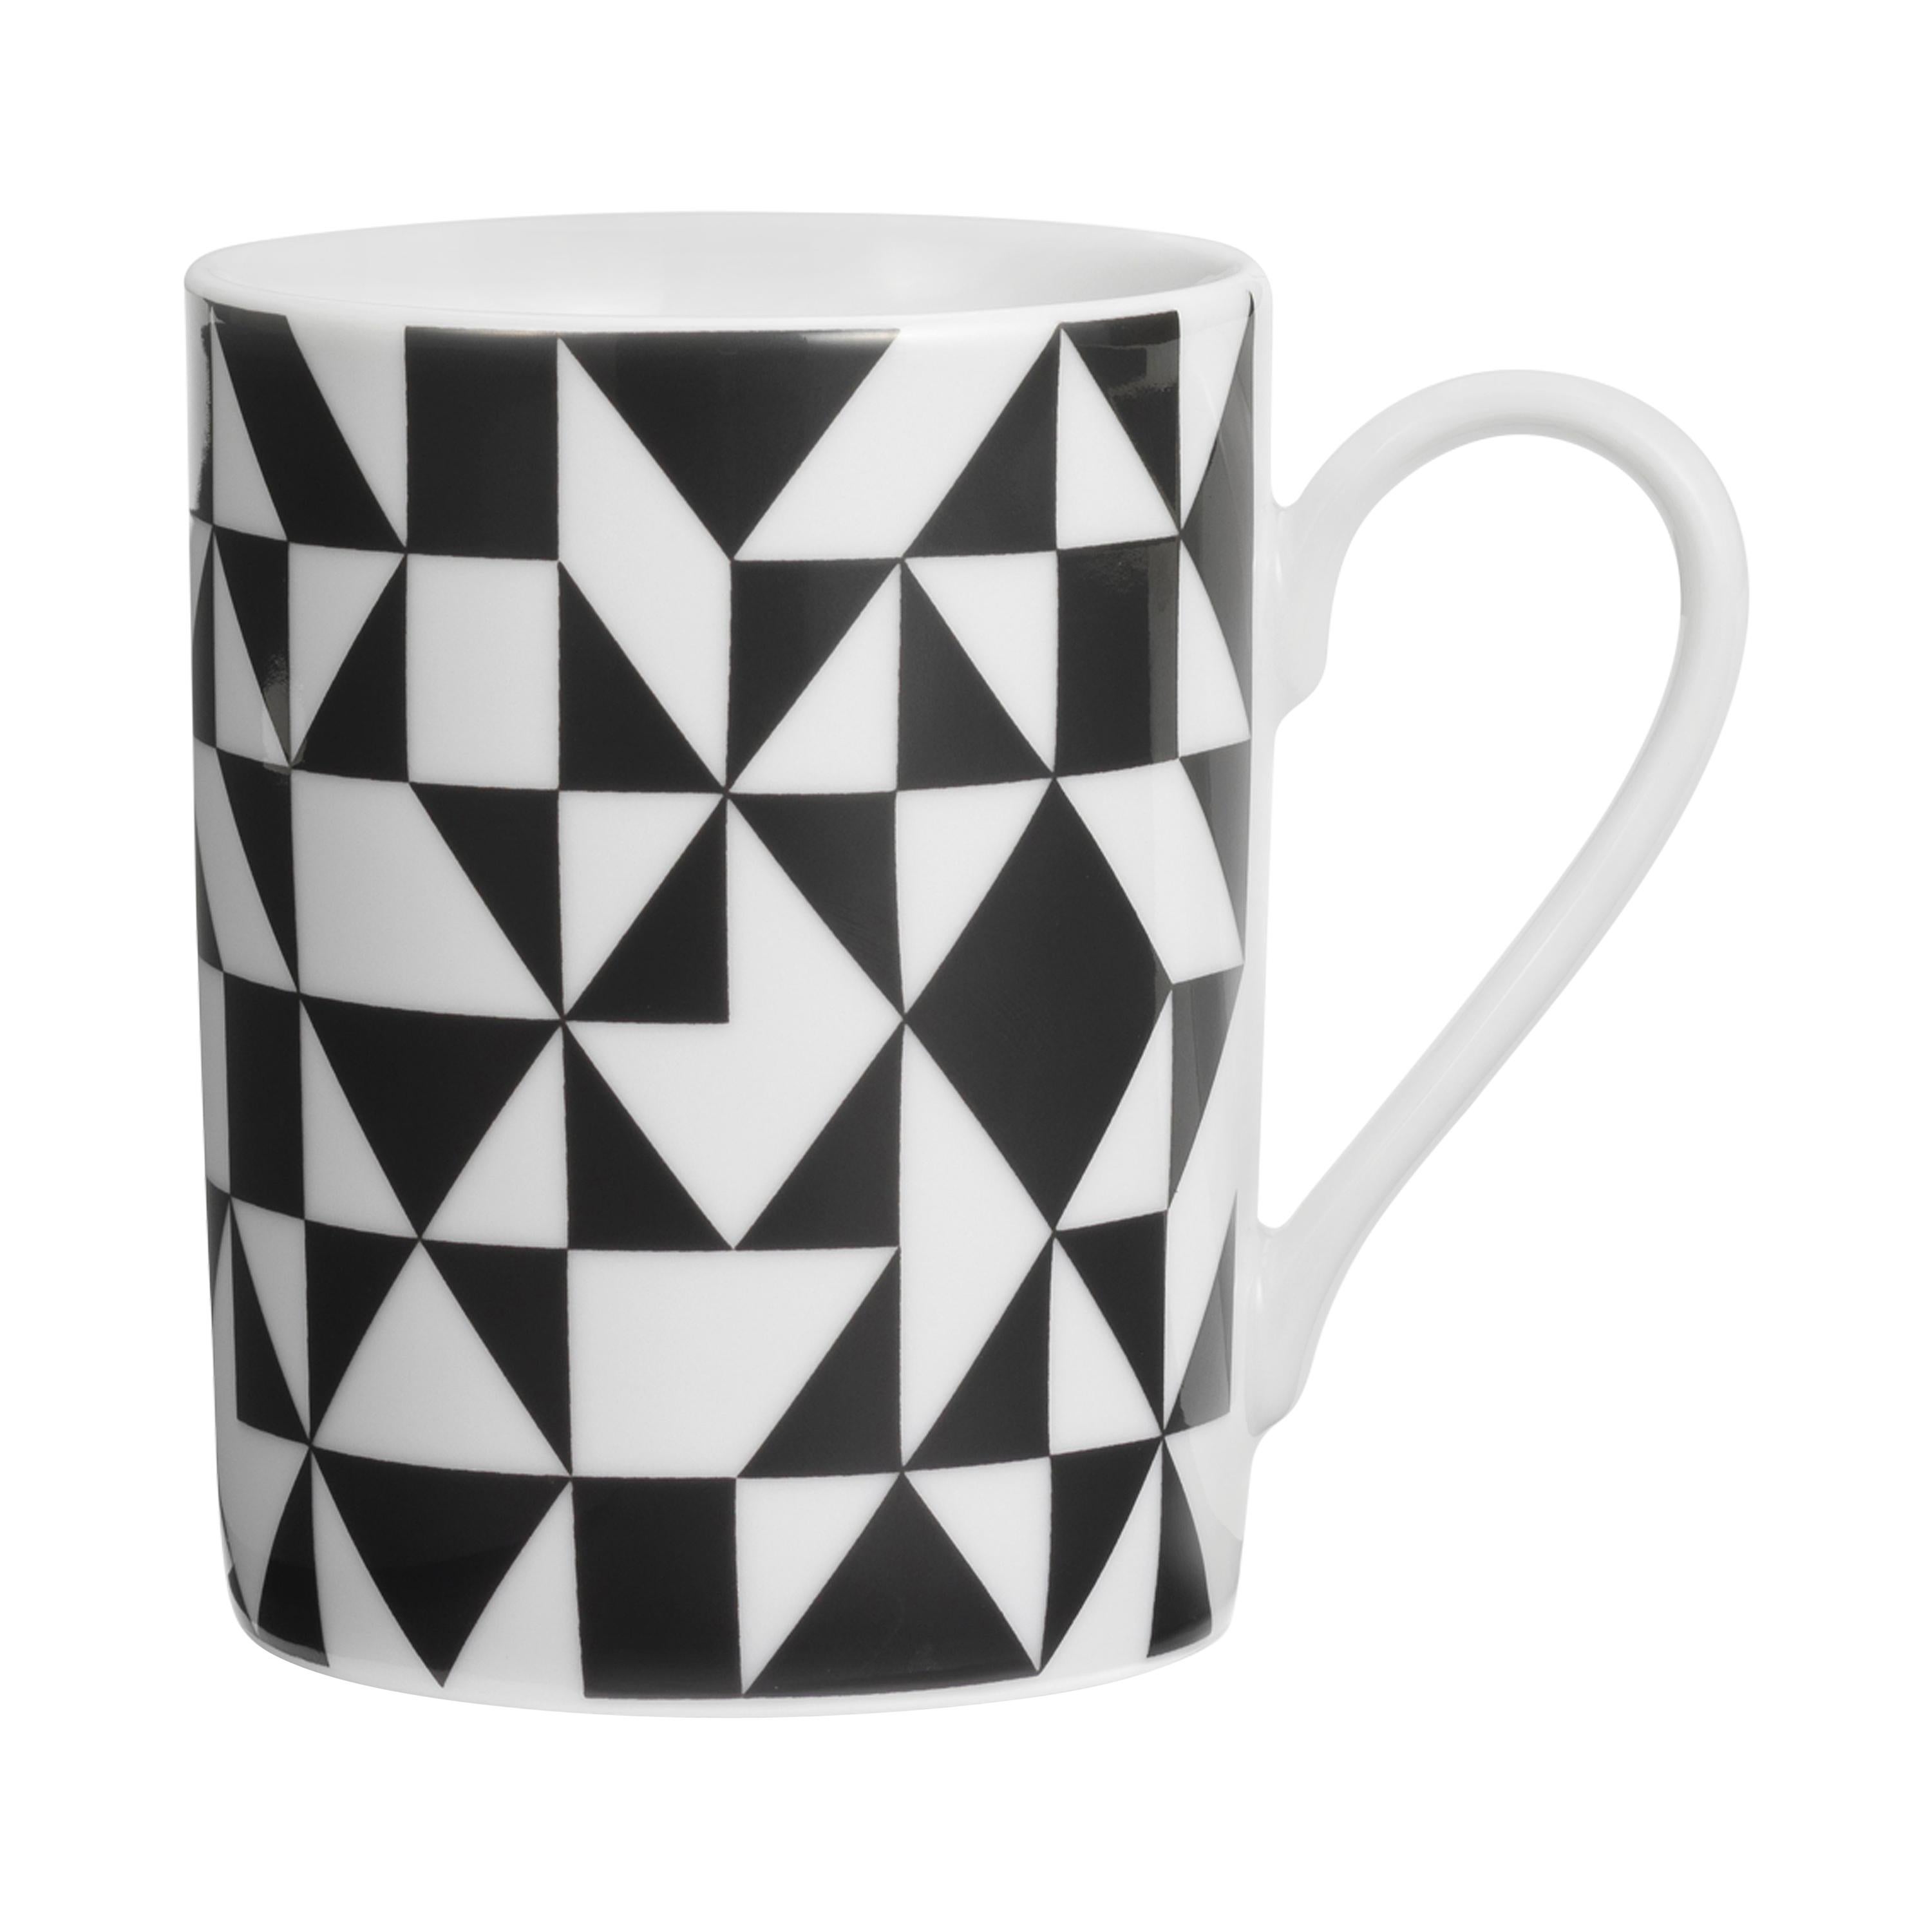 Limited Edition Vitra Coffee Mug in Geometric A Pattern by Alexander Girard For Sale